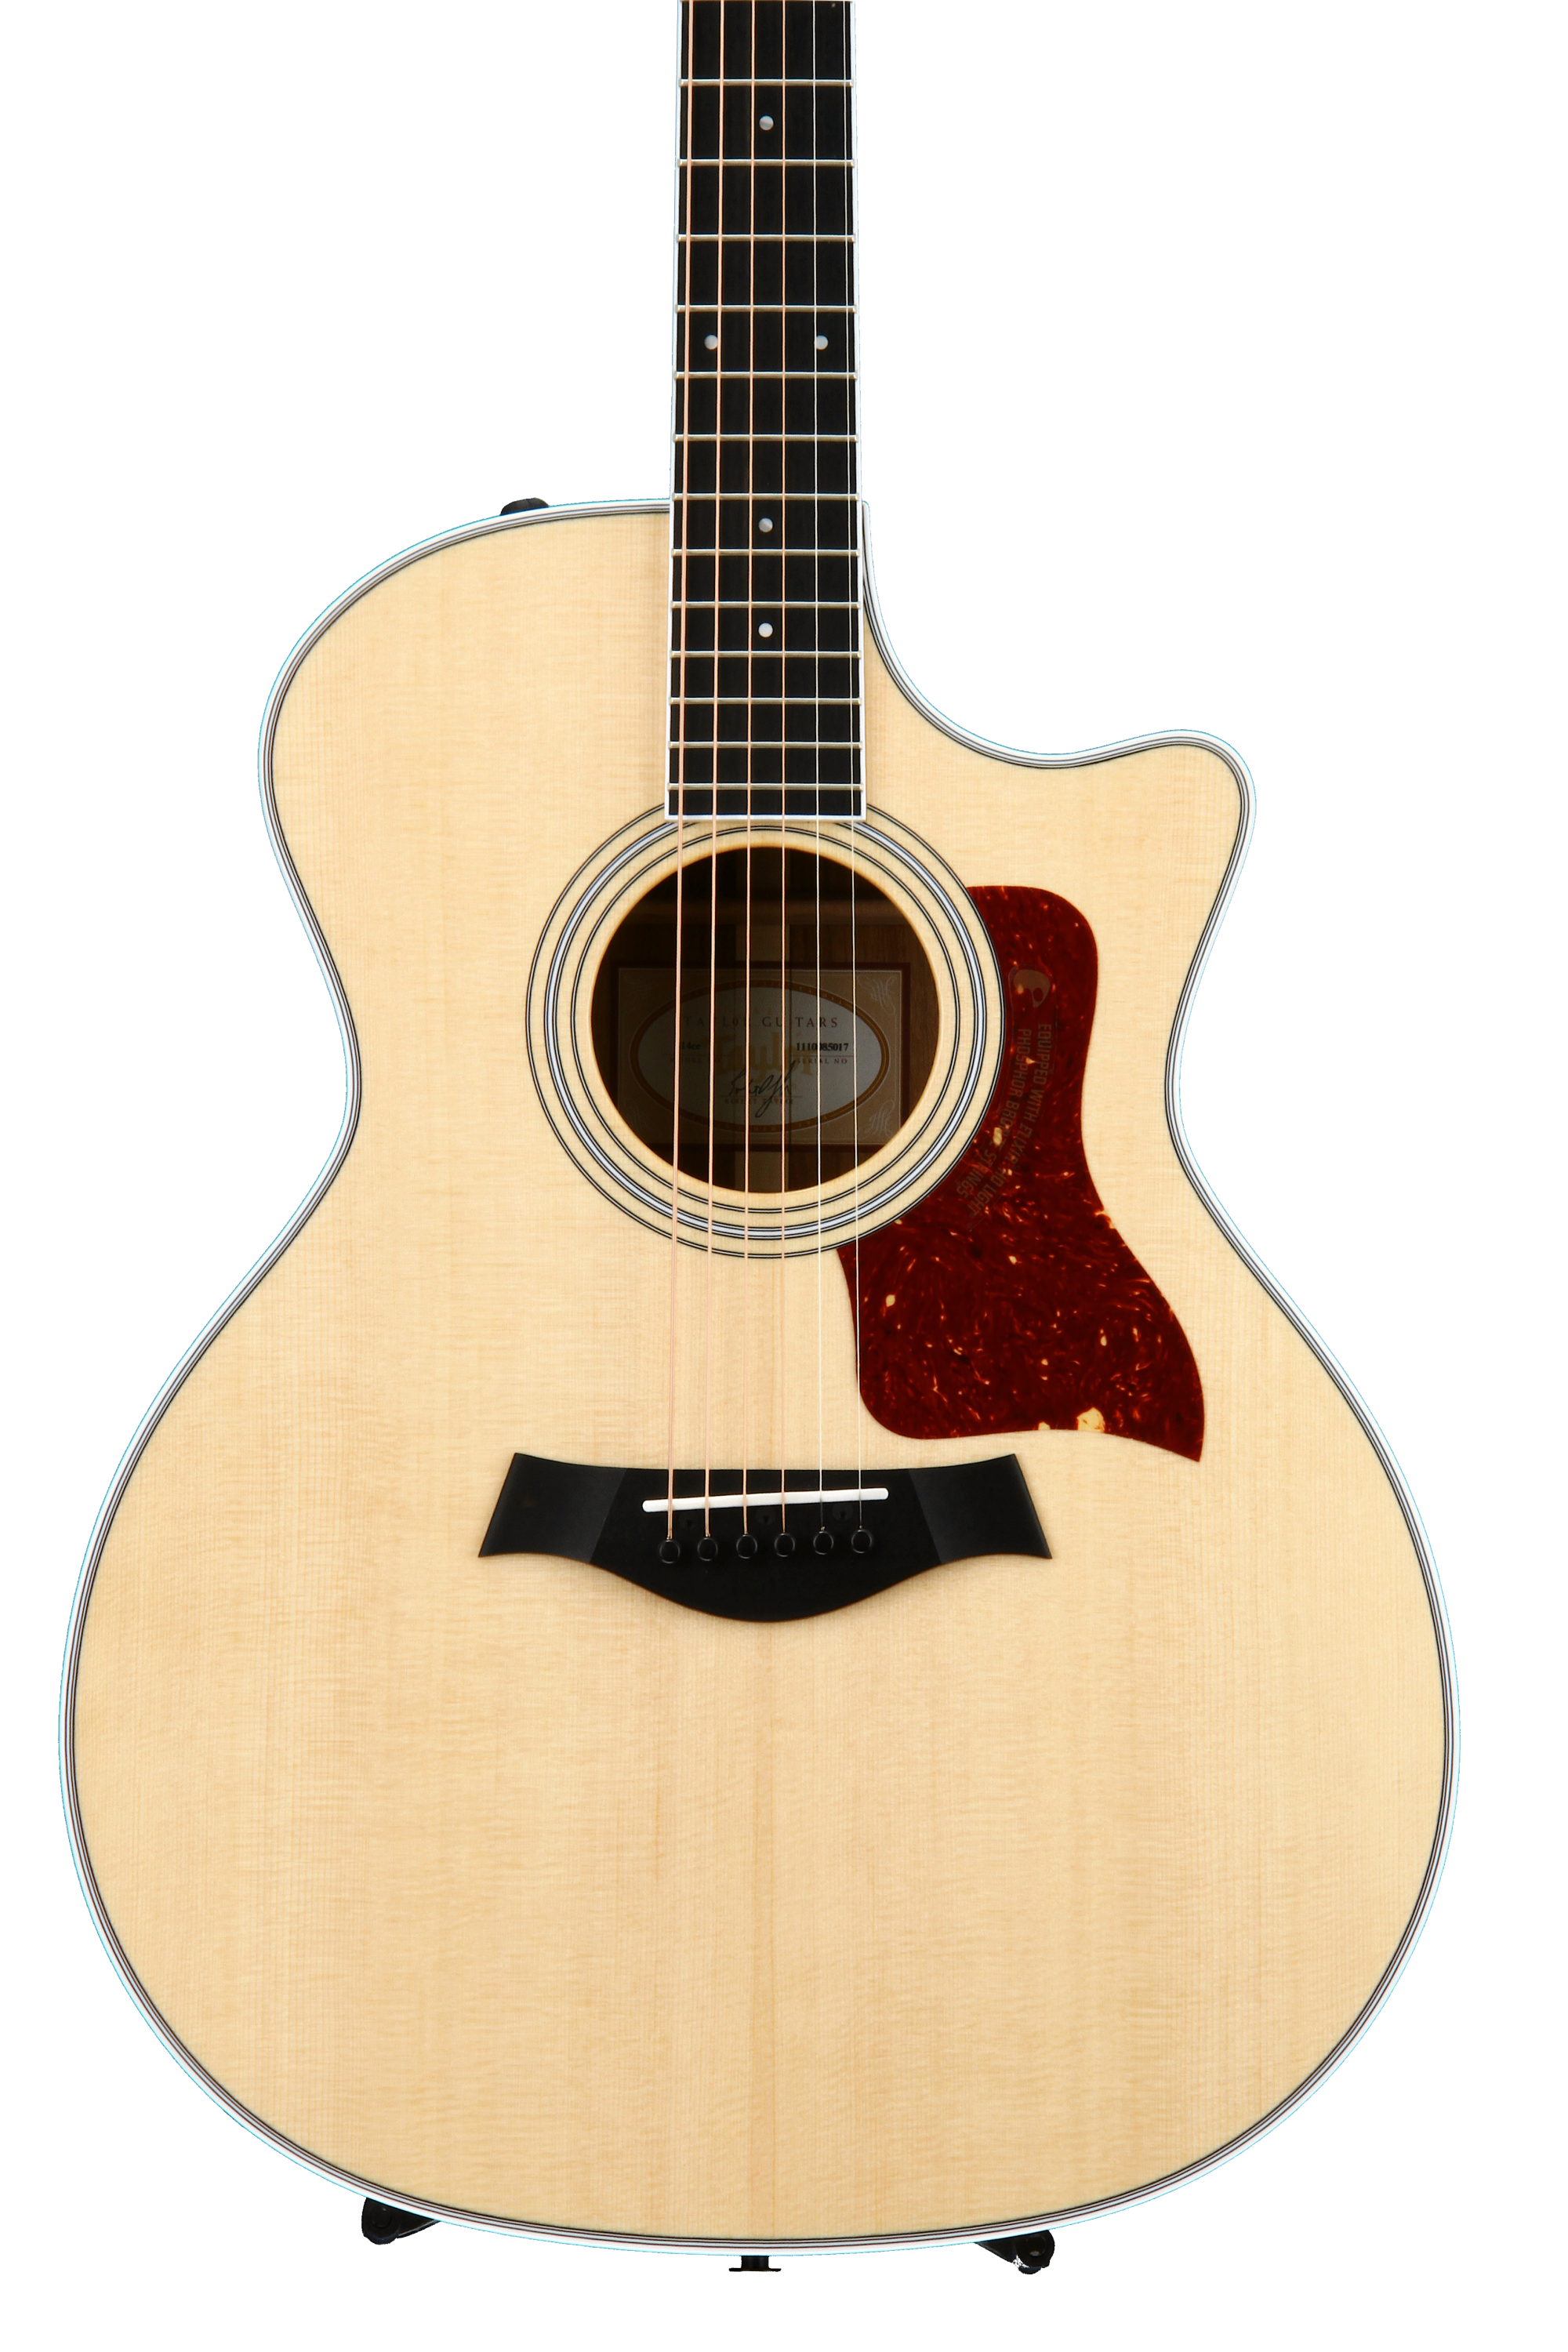 Taylor 414ce - Ovangkol Back and Sides | Sweetwater